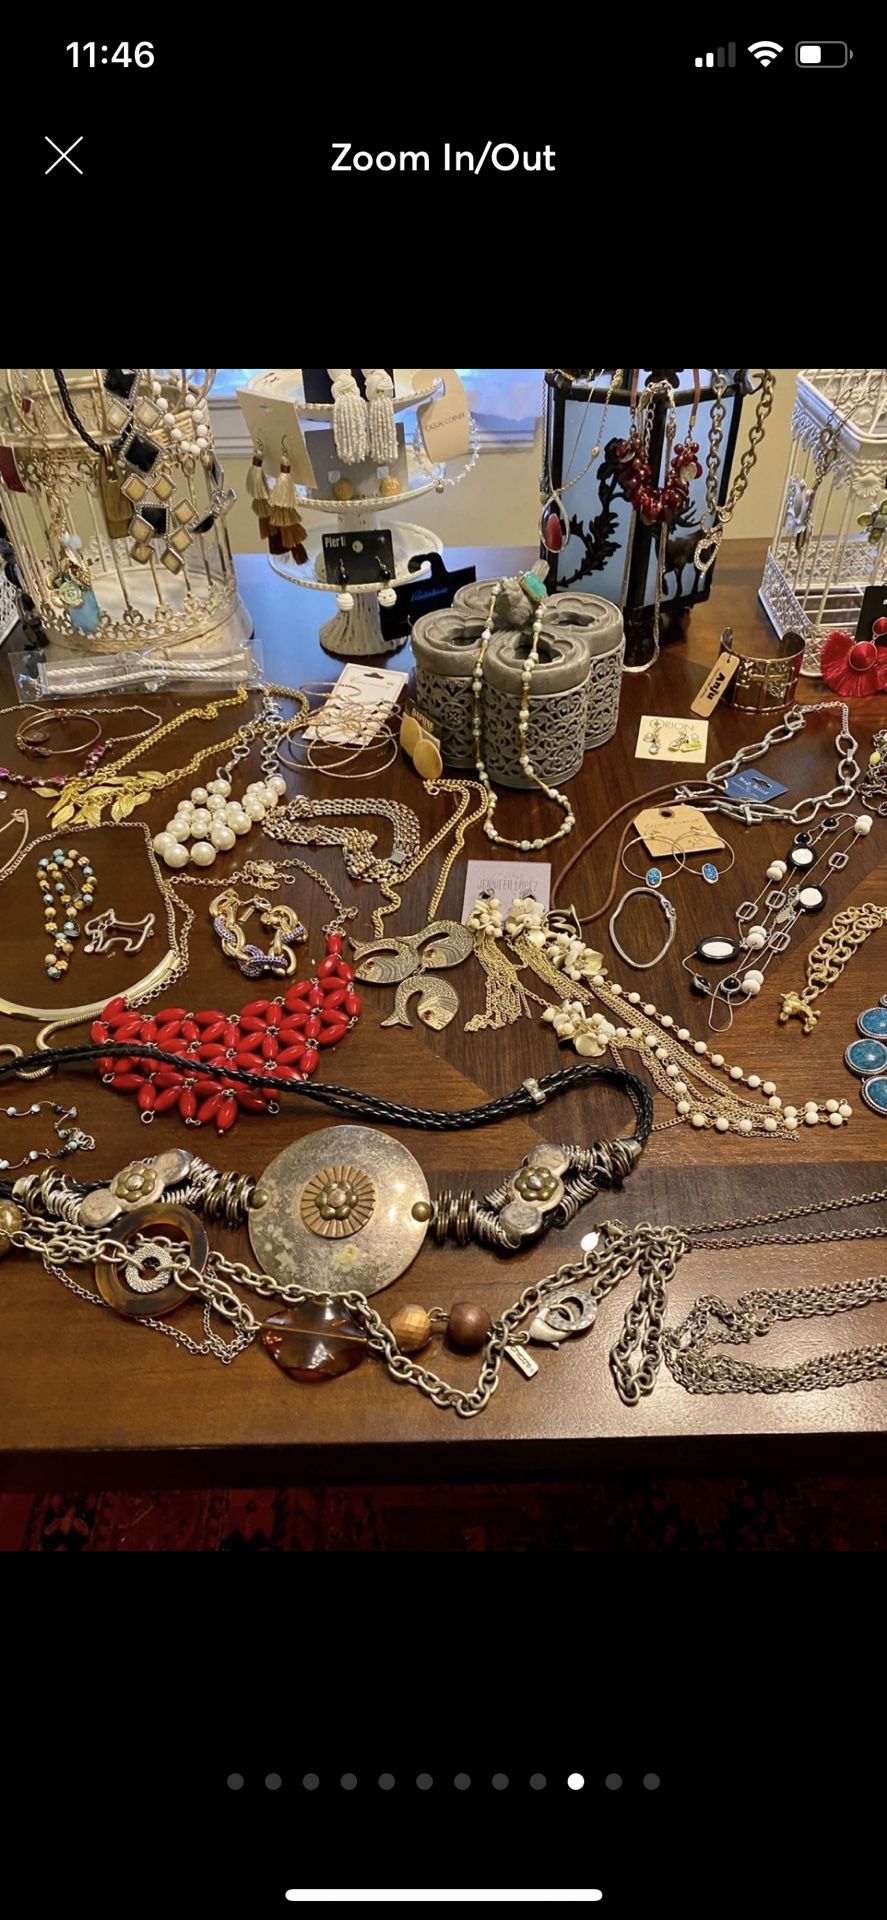 Lot of jewelry, beads, and cutters